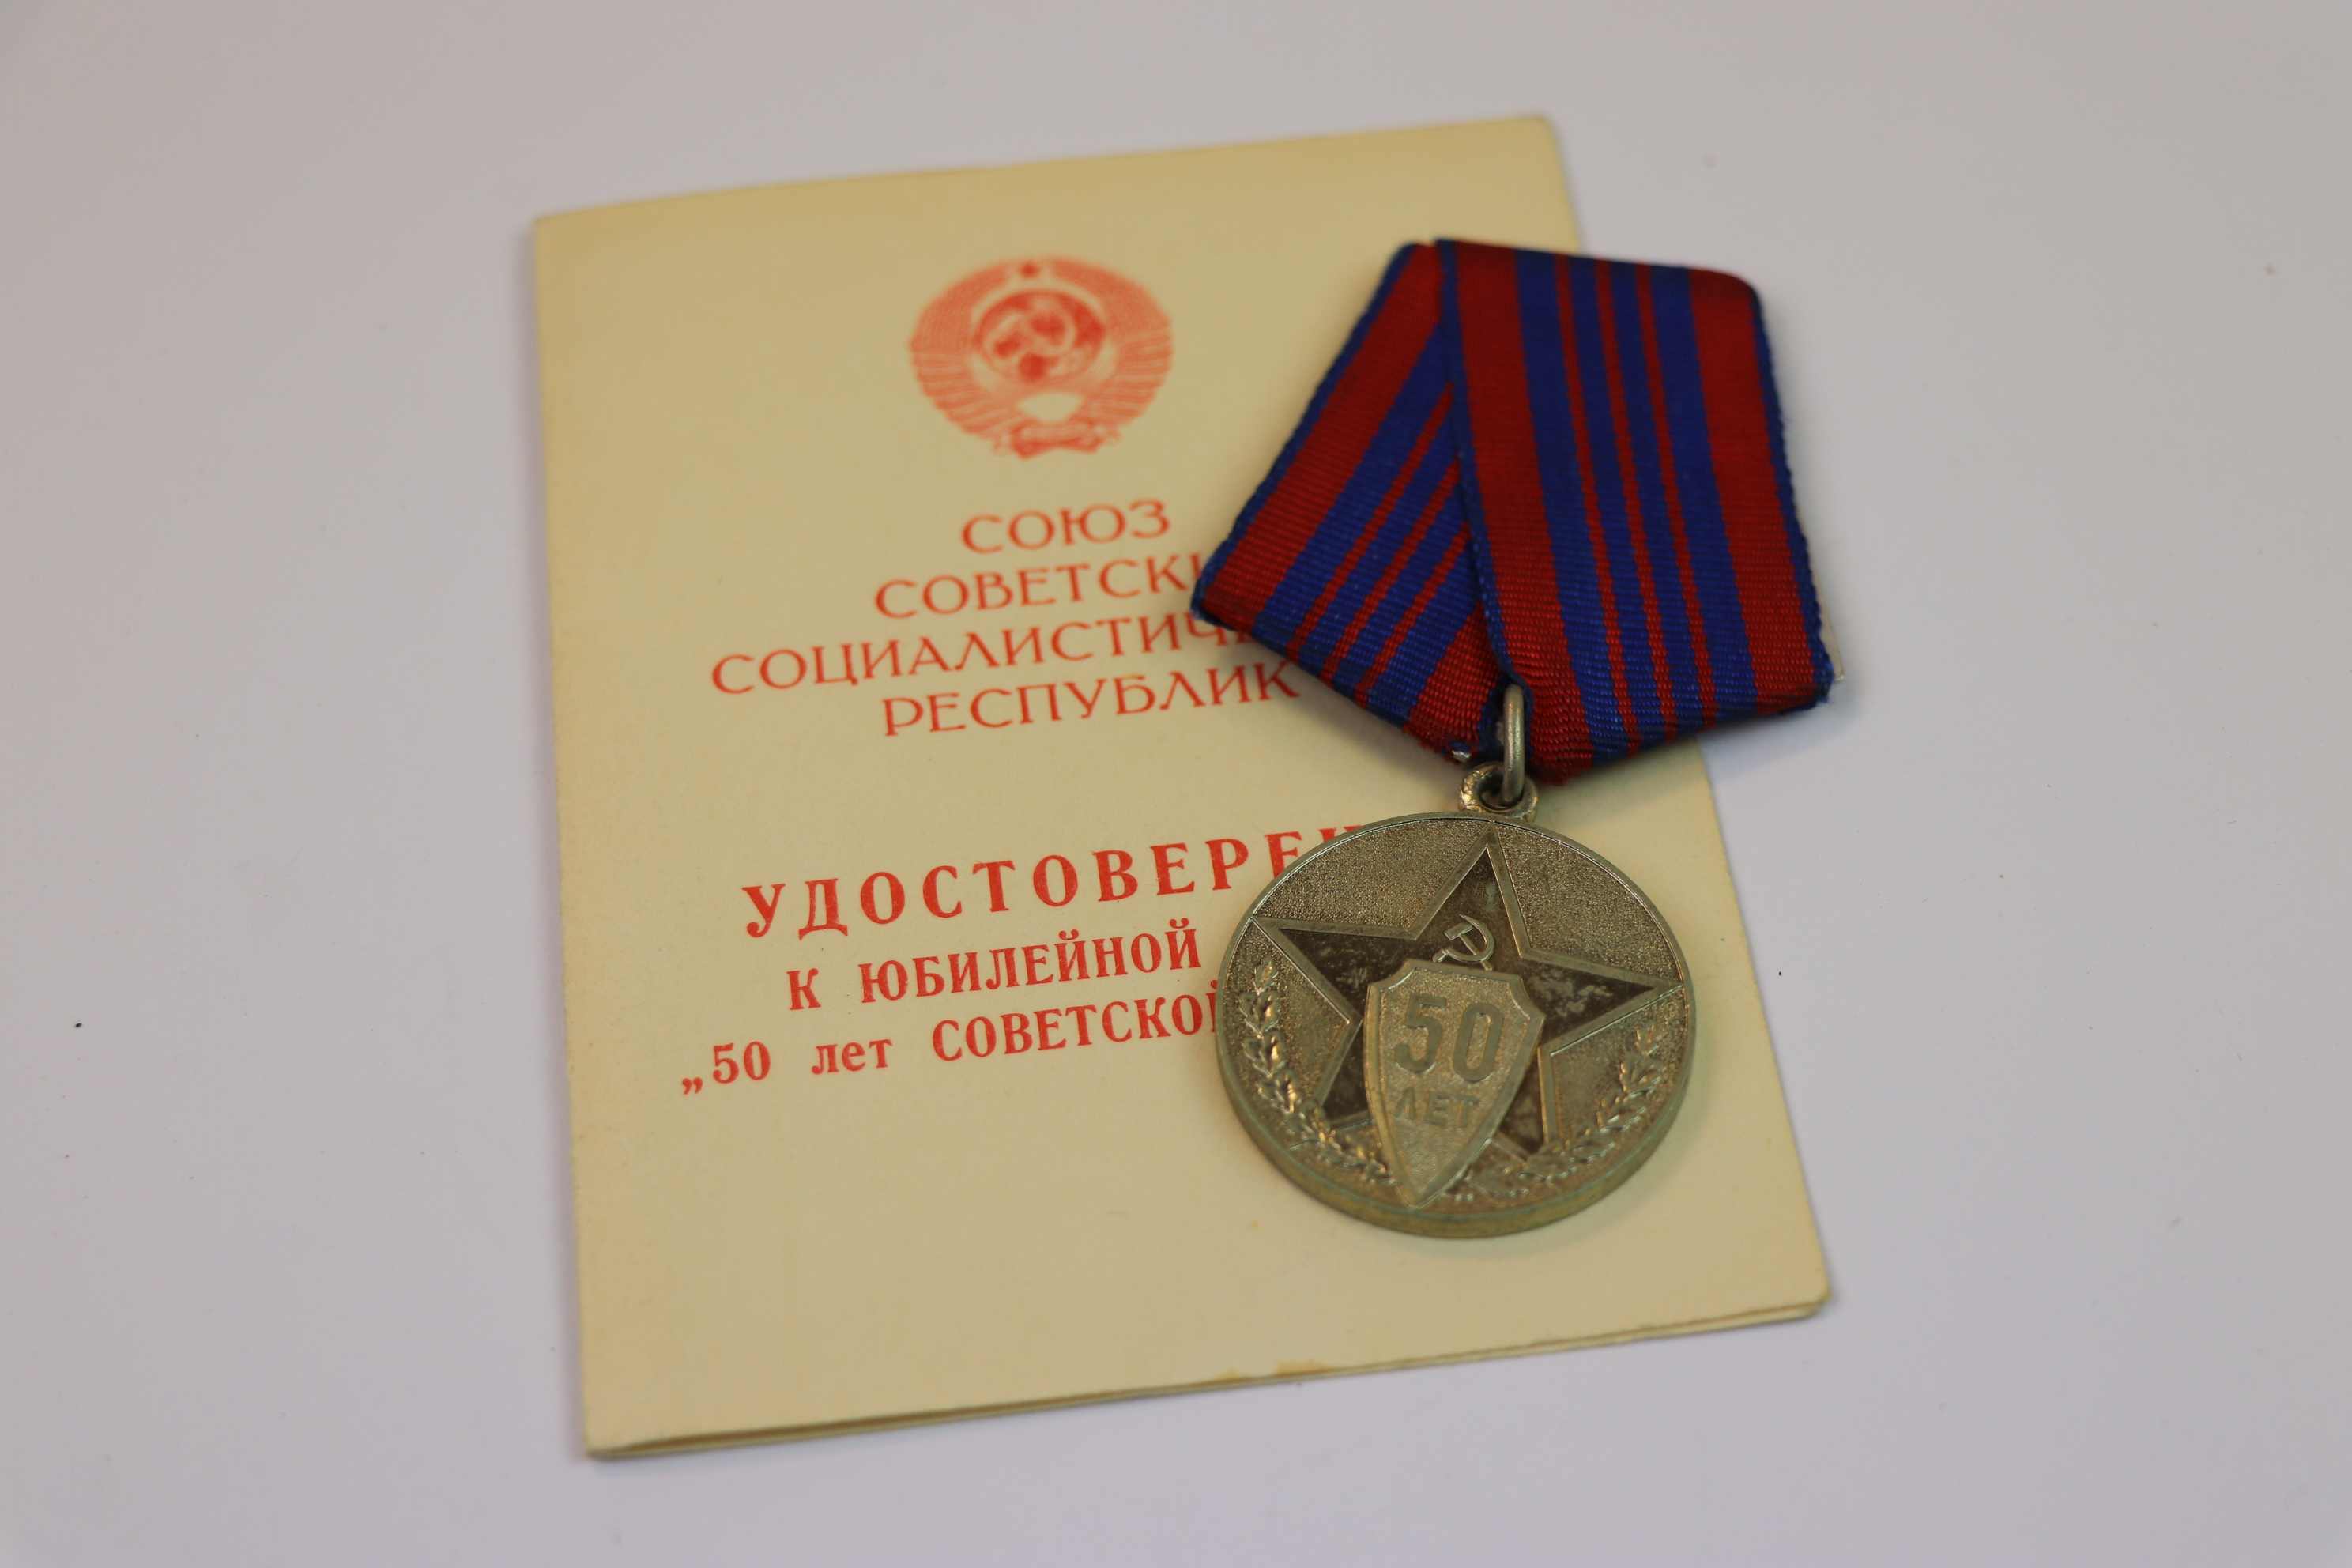 A Russian Medal For 50 Years Of The Soviet Militia, Issued To A Colonel. - Image 9 of 9